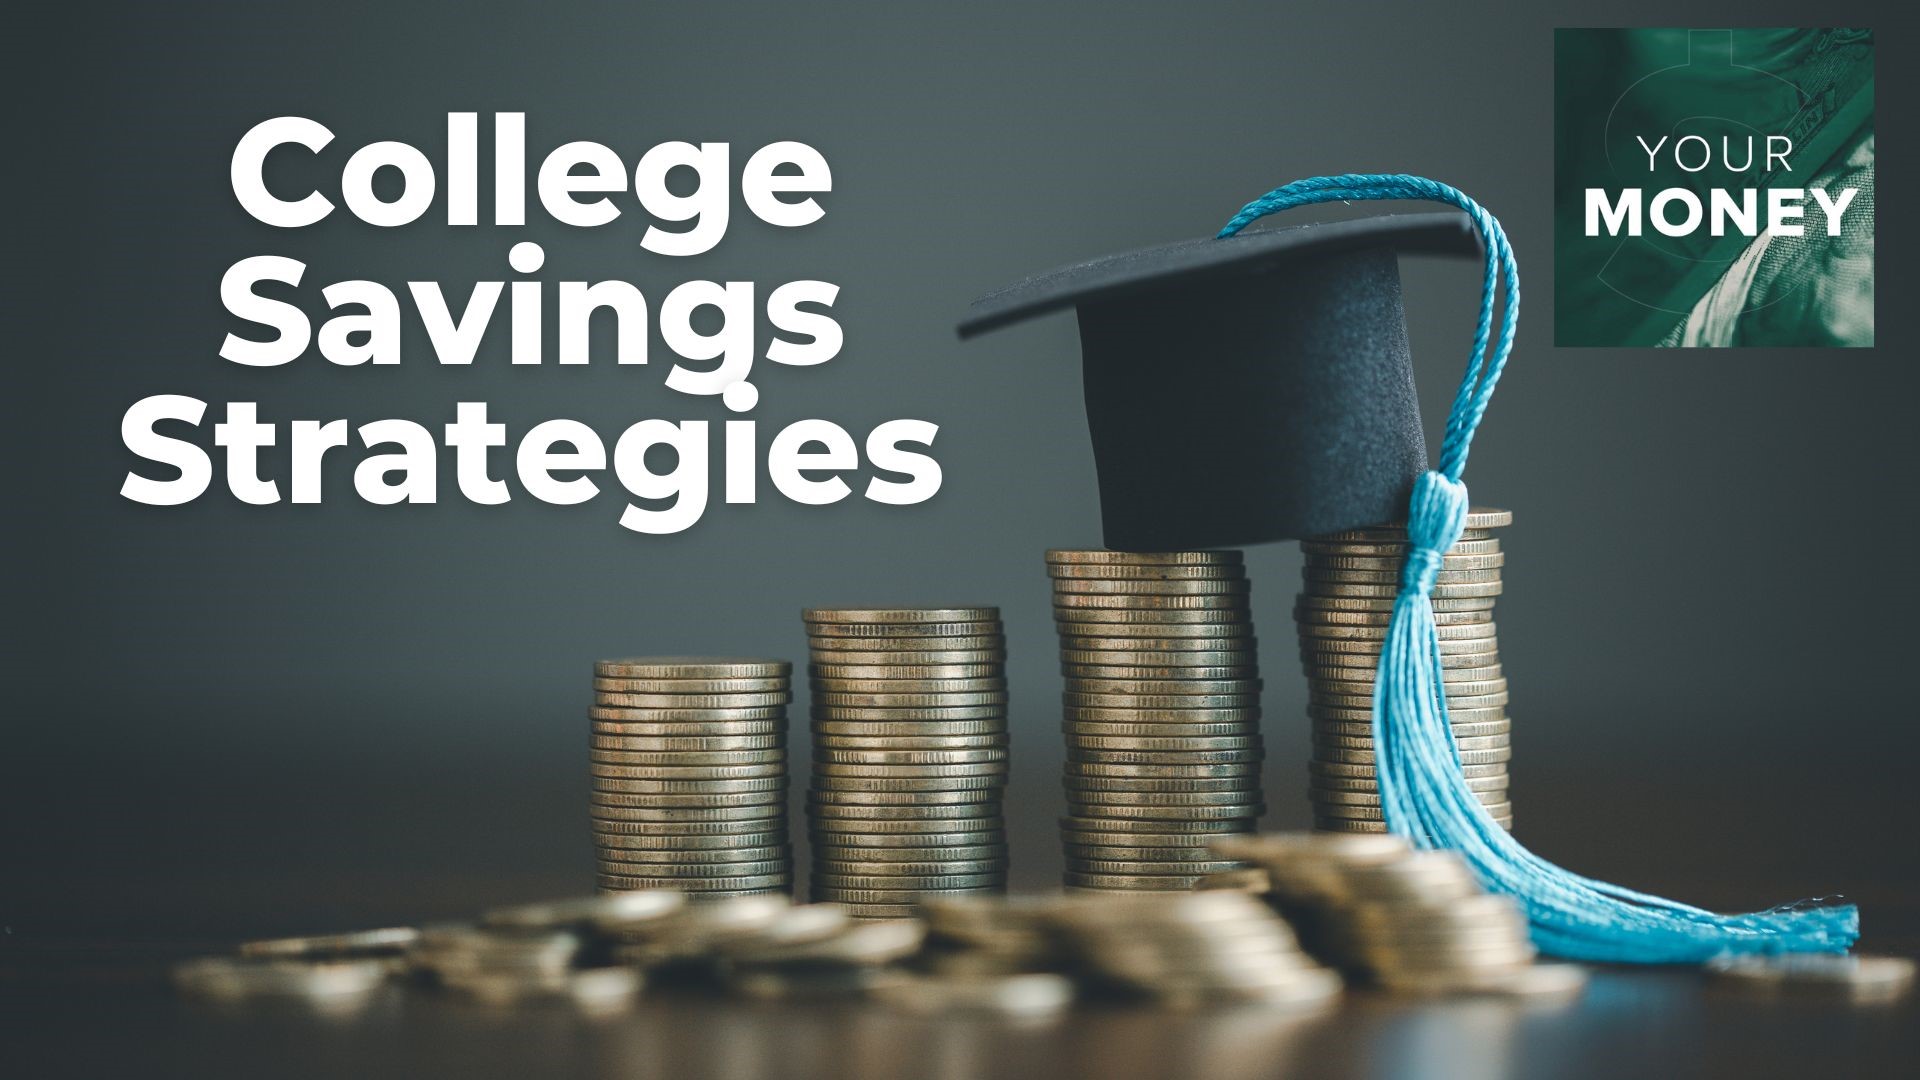 Gordon Severson shares strategies to help parents and students save for college. The accounts that can help you save on taxes plus the changes in financial aid.